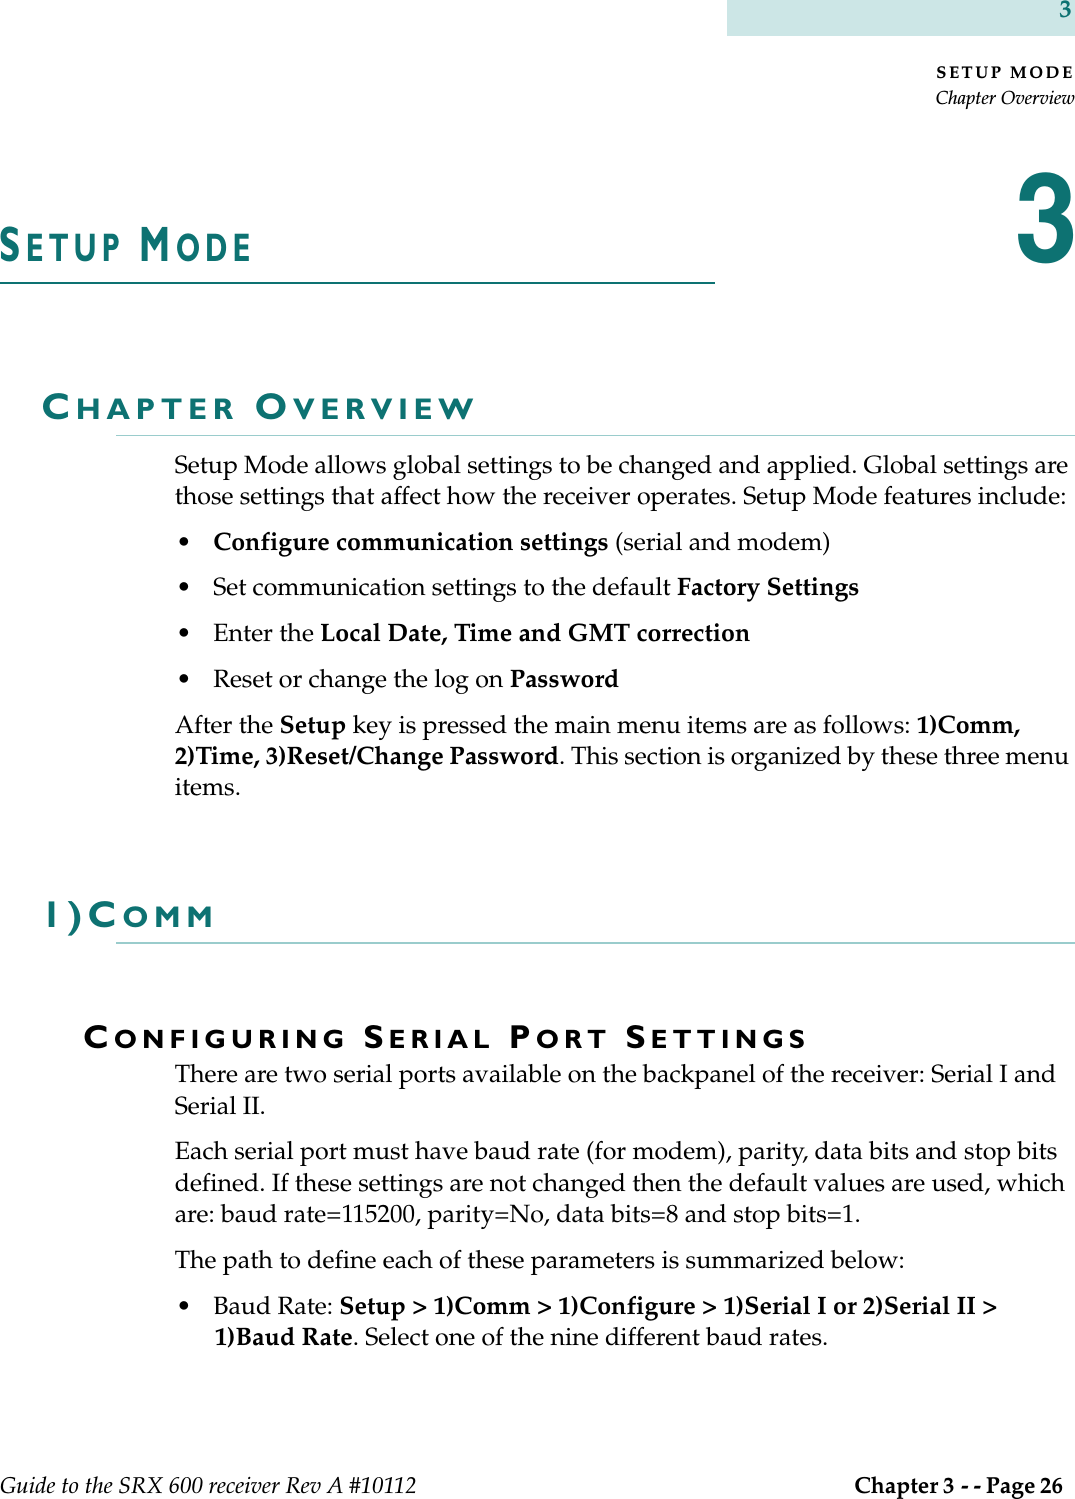 SETUP MODEChapter OverviewGuide to the SRX 600 receiver Rev A #10112  Chapter 3 - - Page 26 3SETUP MODE3CHAPTER OVERVIEWSetup Mode allows global settings to be changed and applied. Global settings are those settings that affect how the receiver operates. Setup Mode features include:•Configure communication settings (serial and modem)• Set communication settings to the default Factory Settings •Enter the Local Date, Time and GMT correction• Reset or change the log on PasswordAfter the Setup key is pressed the main menu items are as follows: 1)Comm, 2)Time, 3)Reset/Change Password. This section is organized by these three menu items.1)COMMCONFIGURING SERIAL PORT SETTINGSThere are two serial ports available on the backpanel of the receiver: Serial I and Serial II.Each serial port must have baud rate (for modem), parity, data bits and stop bits defined. If these settings are not changed then the default values are used, which are: baud rate=115200, parity=No, data bits=8 and stop bits=1.The path to define each of these parameters is summarized below:• Baud Rate: Setup &gt; 1)Comm &gt; 1)Configure &gt; 1)Serial I or 2)Serial II &gt; 1)Baud Rate. Select one of the nine different baud rates.